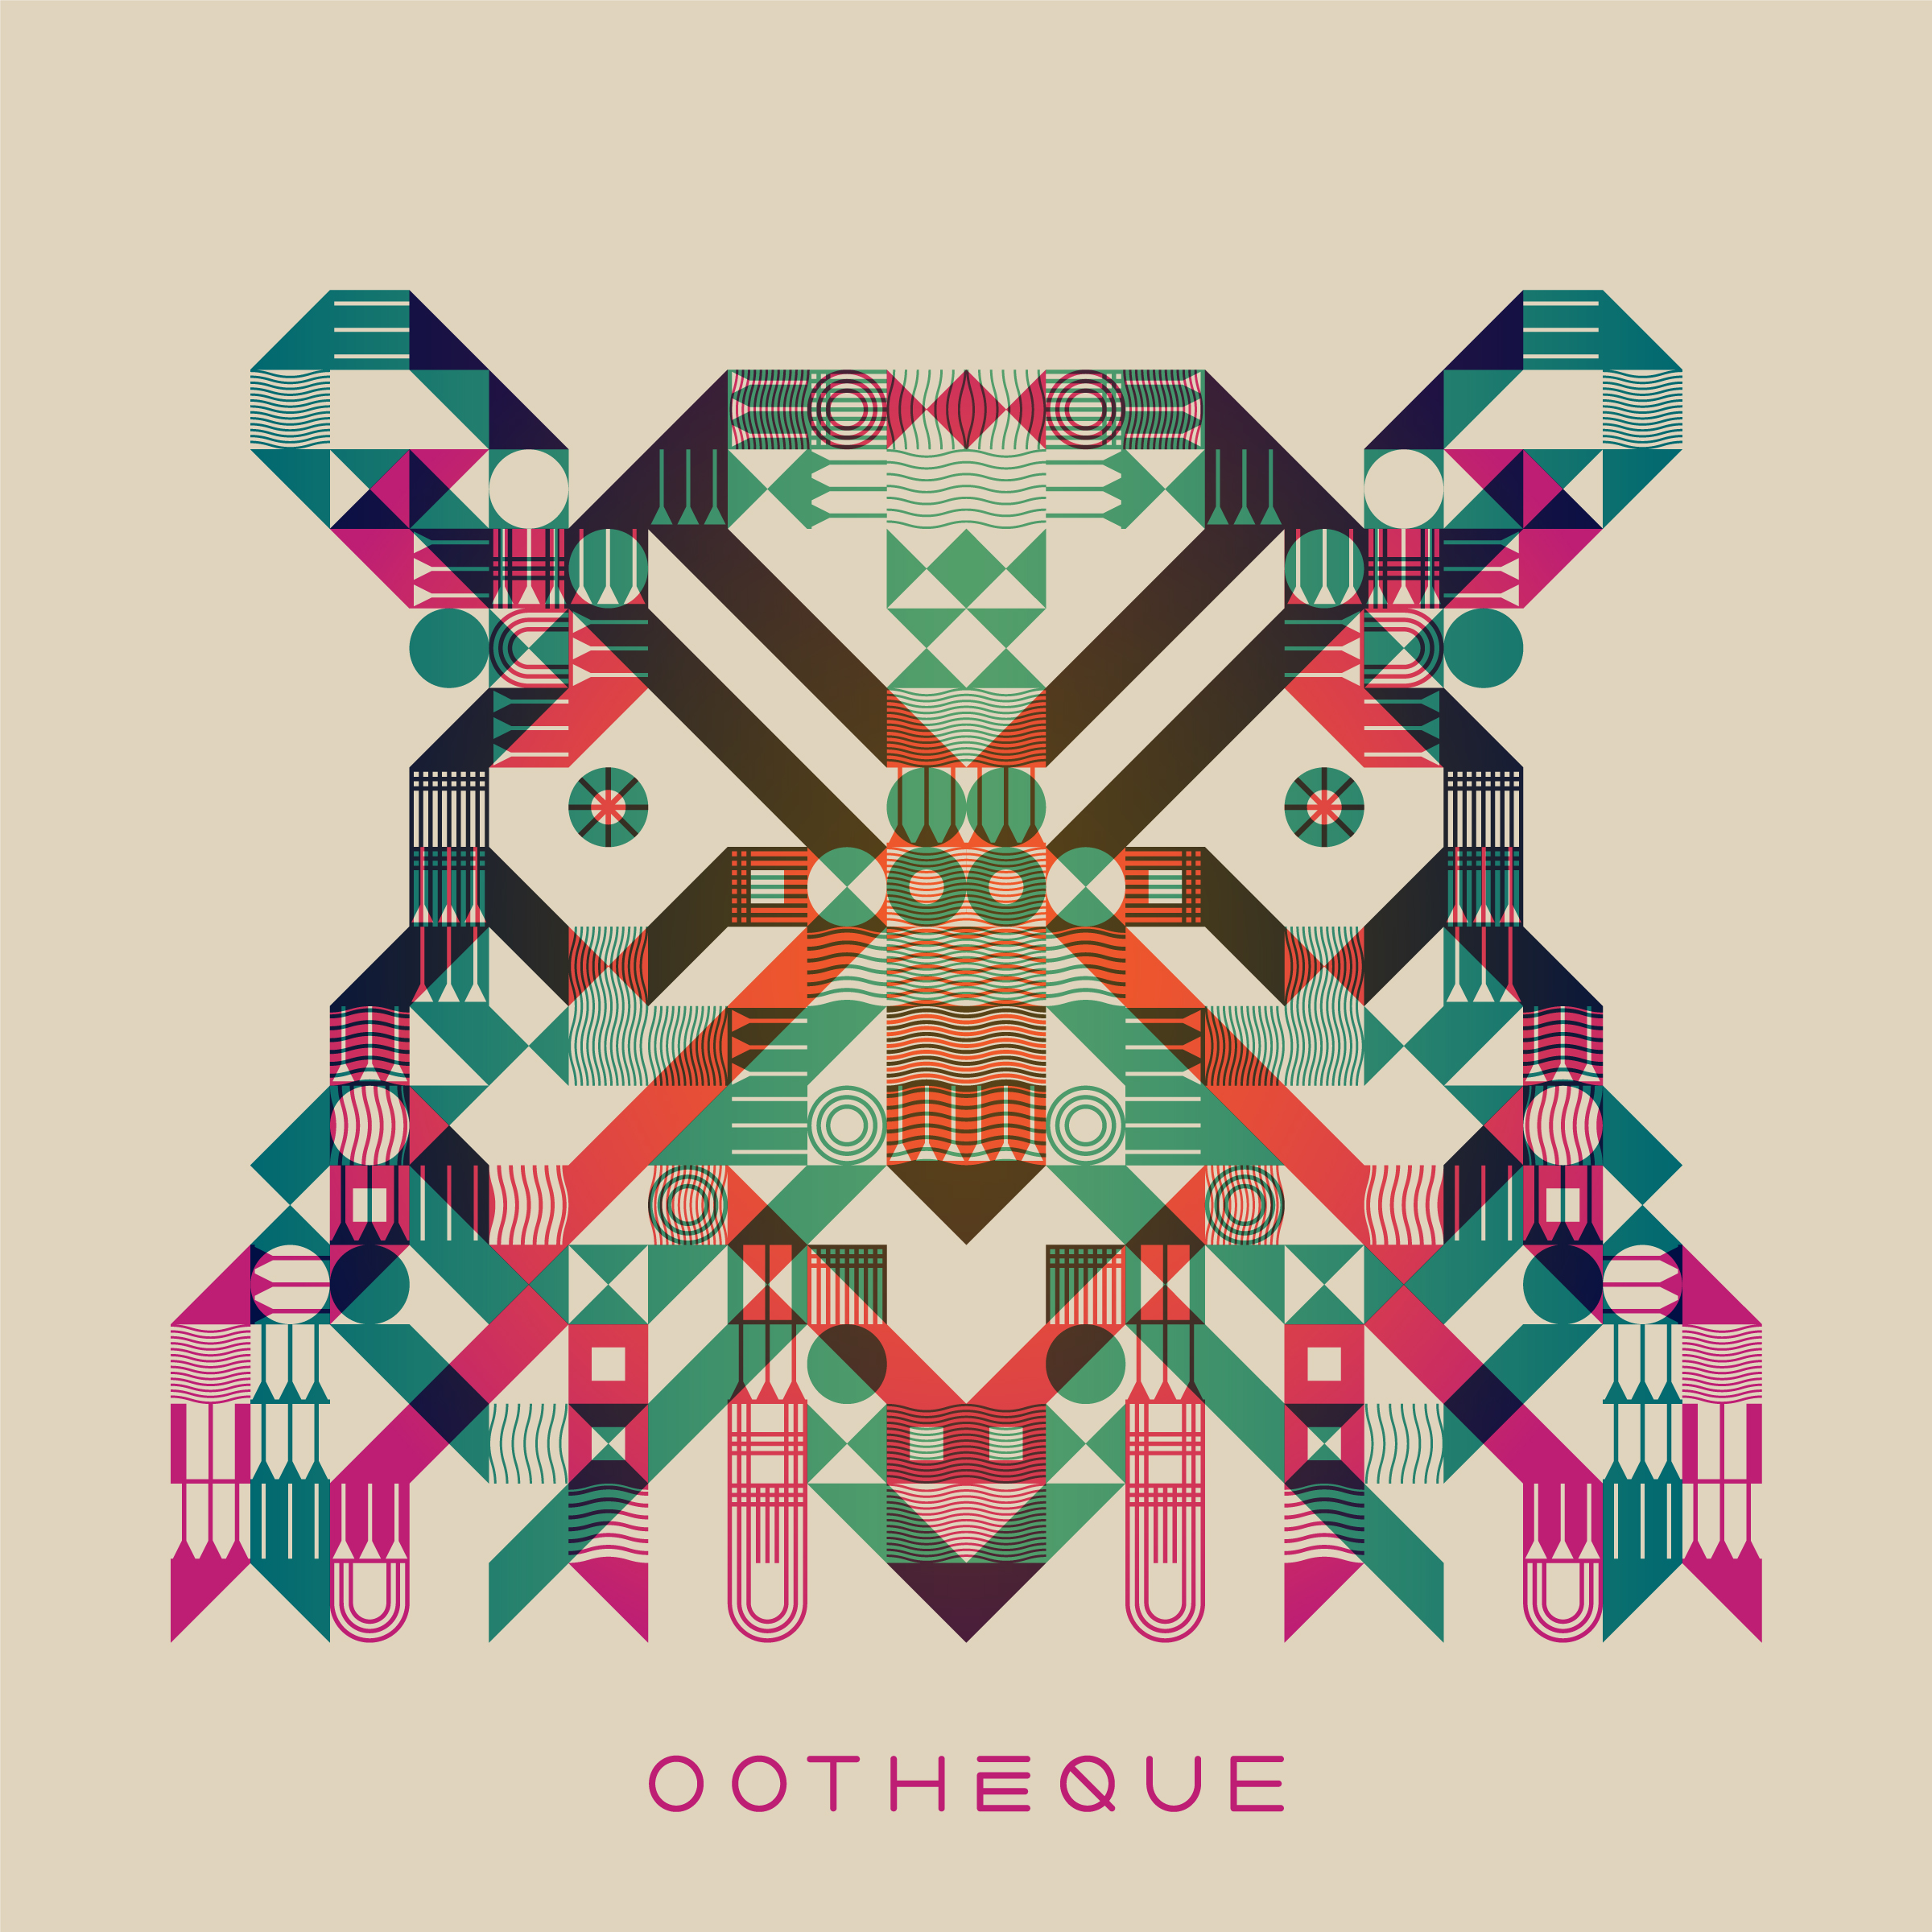 ootheque